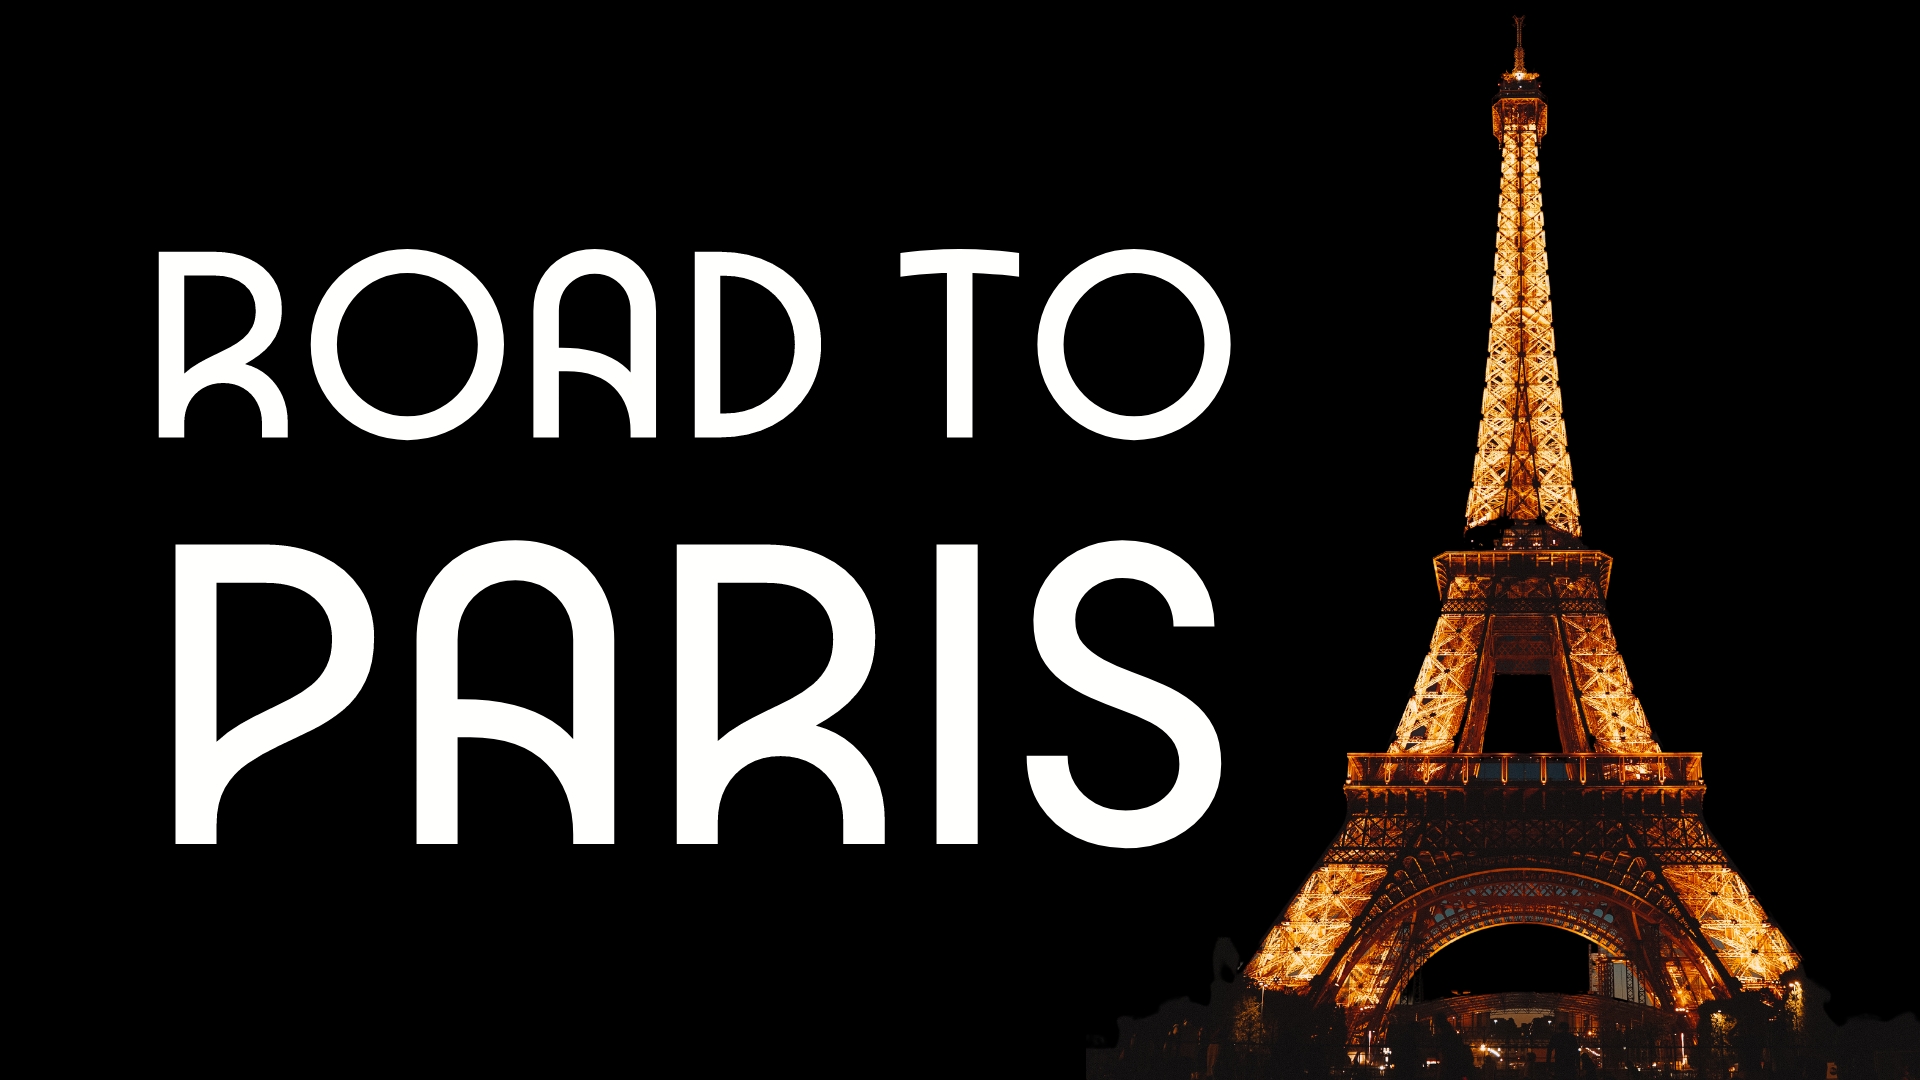 Road to Paris graphic with Eiffel Tower